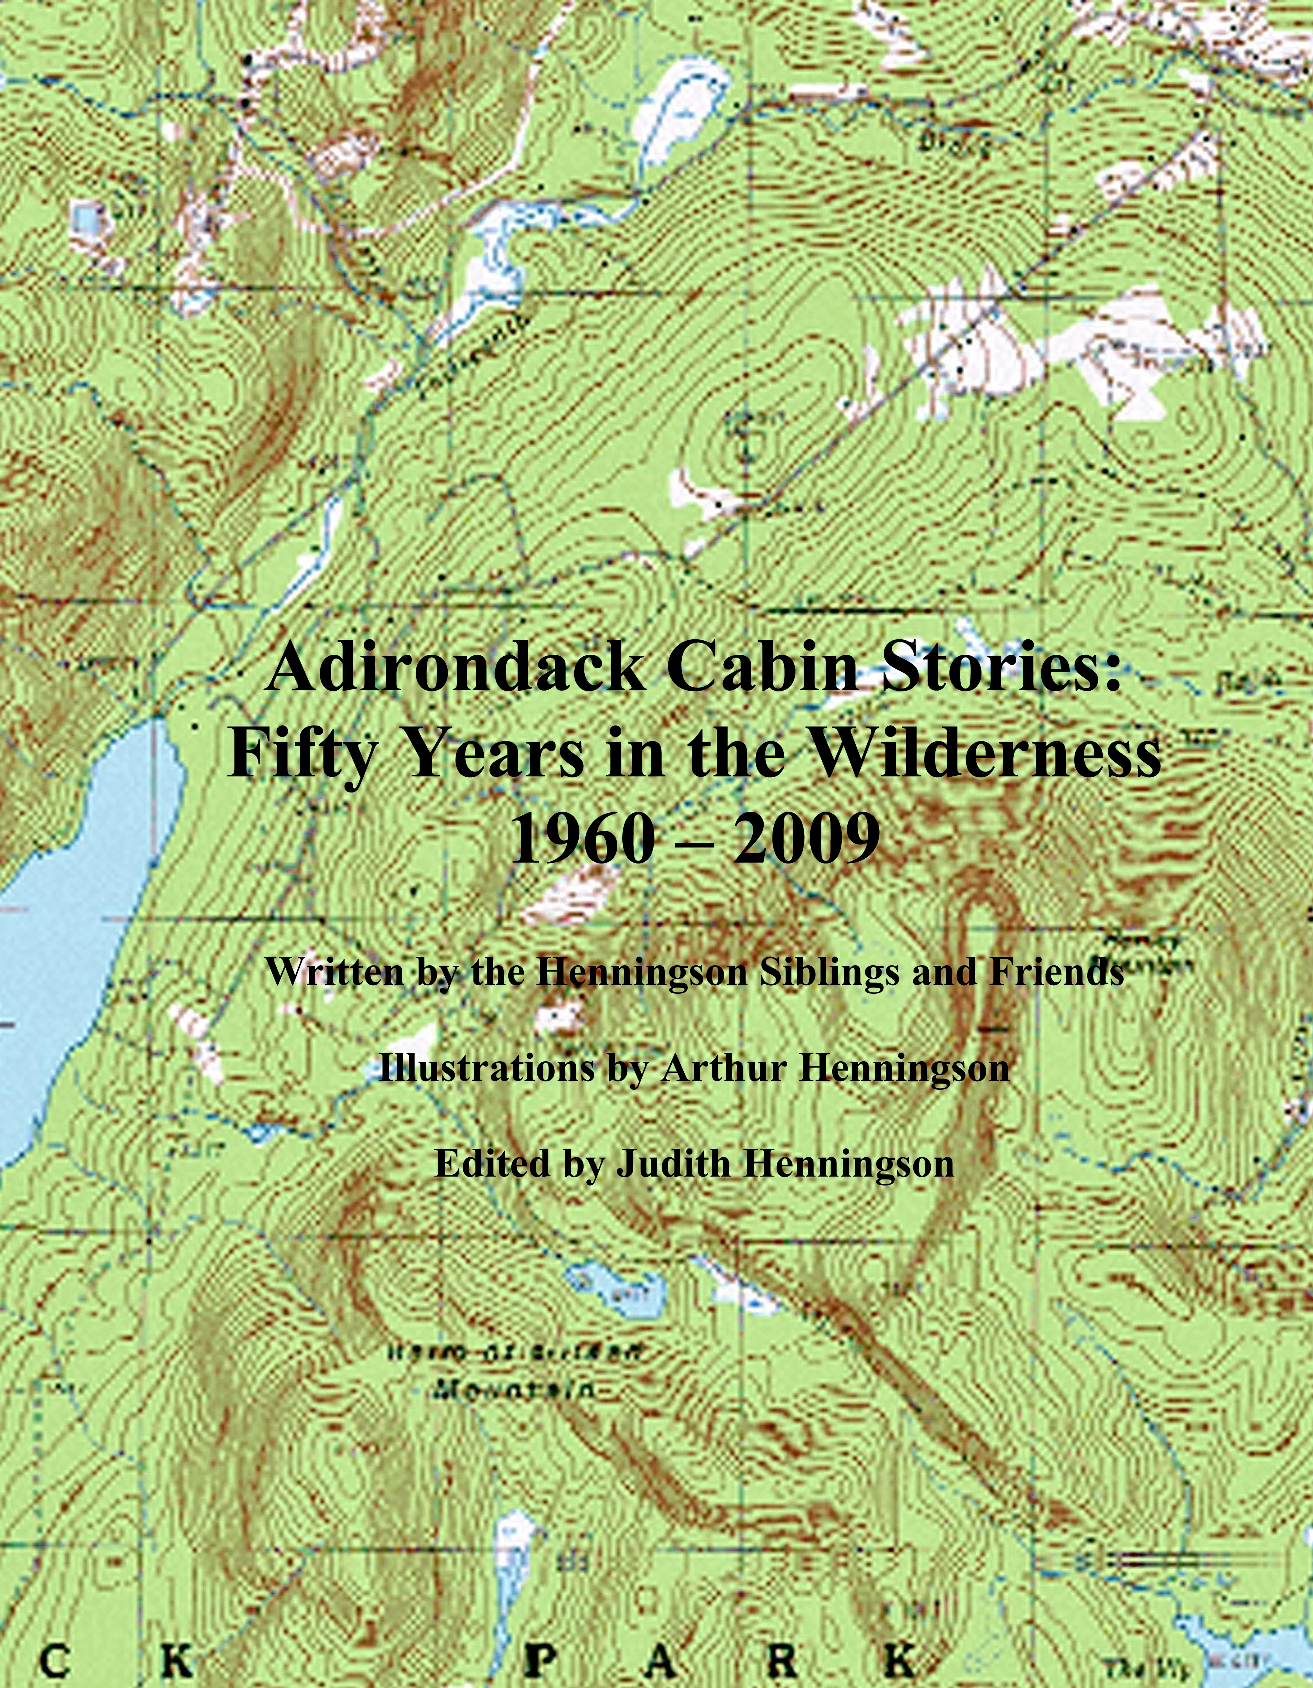 Adirondack cabin stories front cover